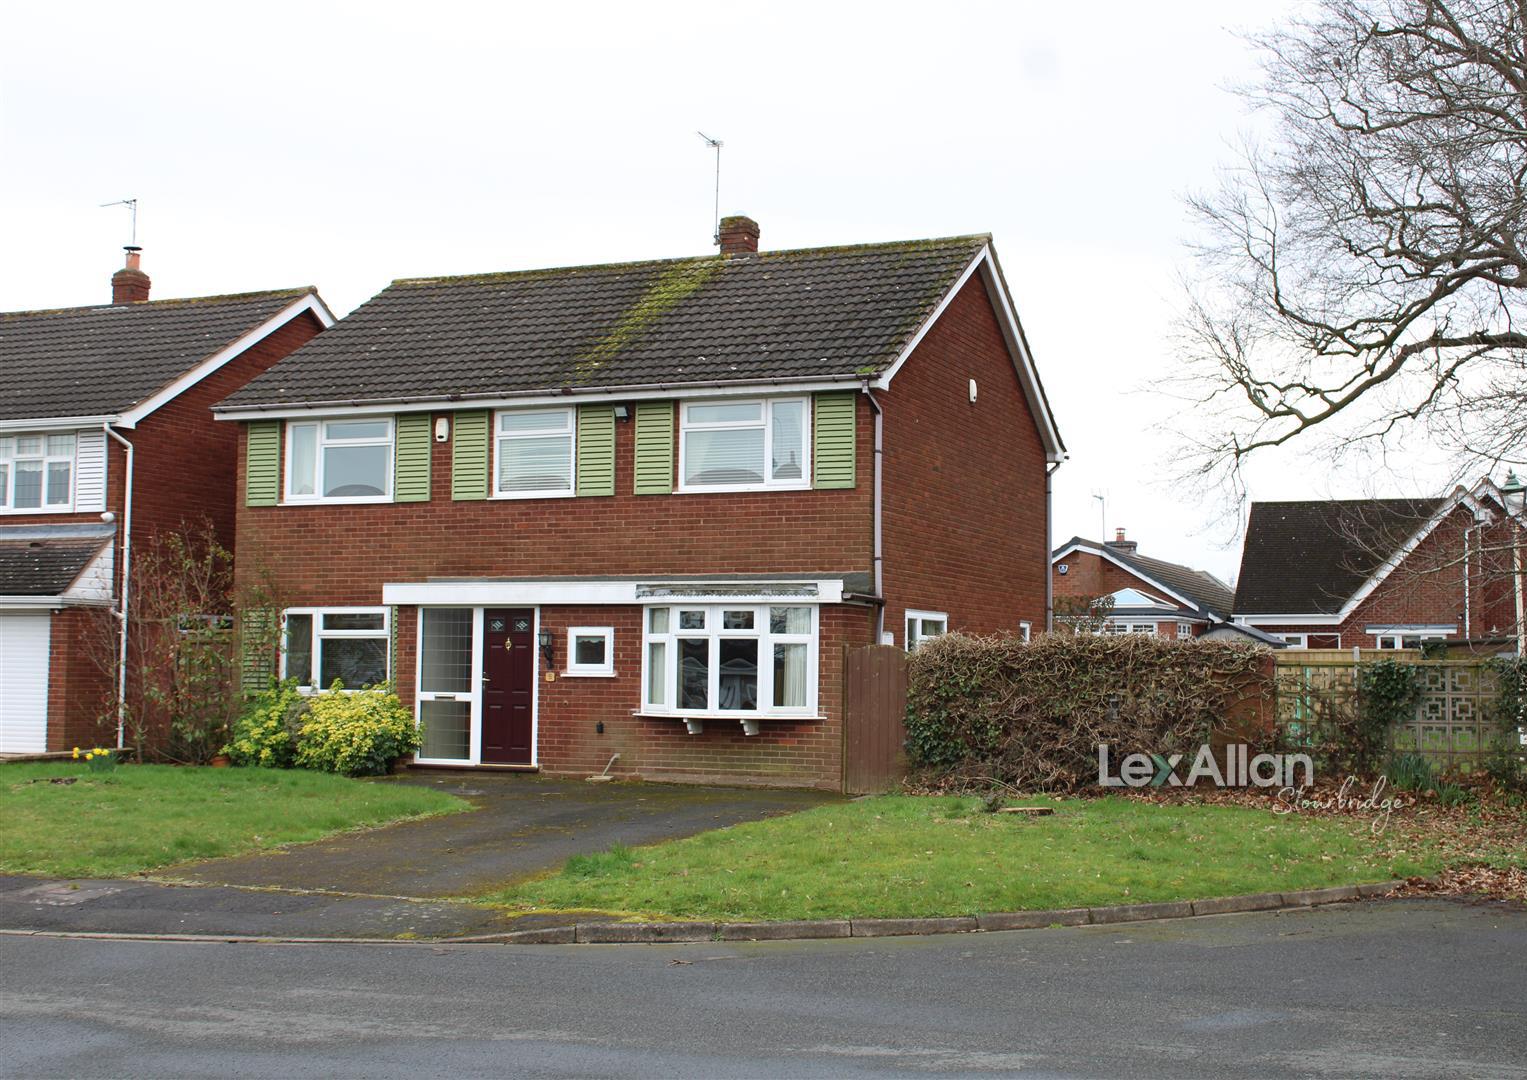 4 bed detached house for sale in Medina Way, Stourbridge - Property Image 1